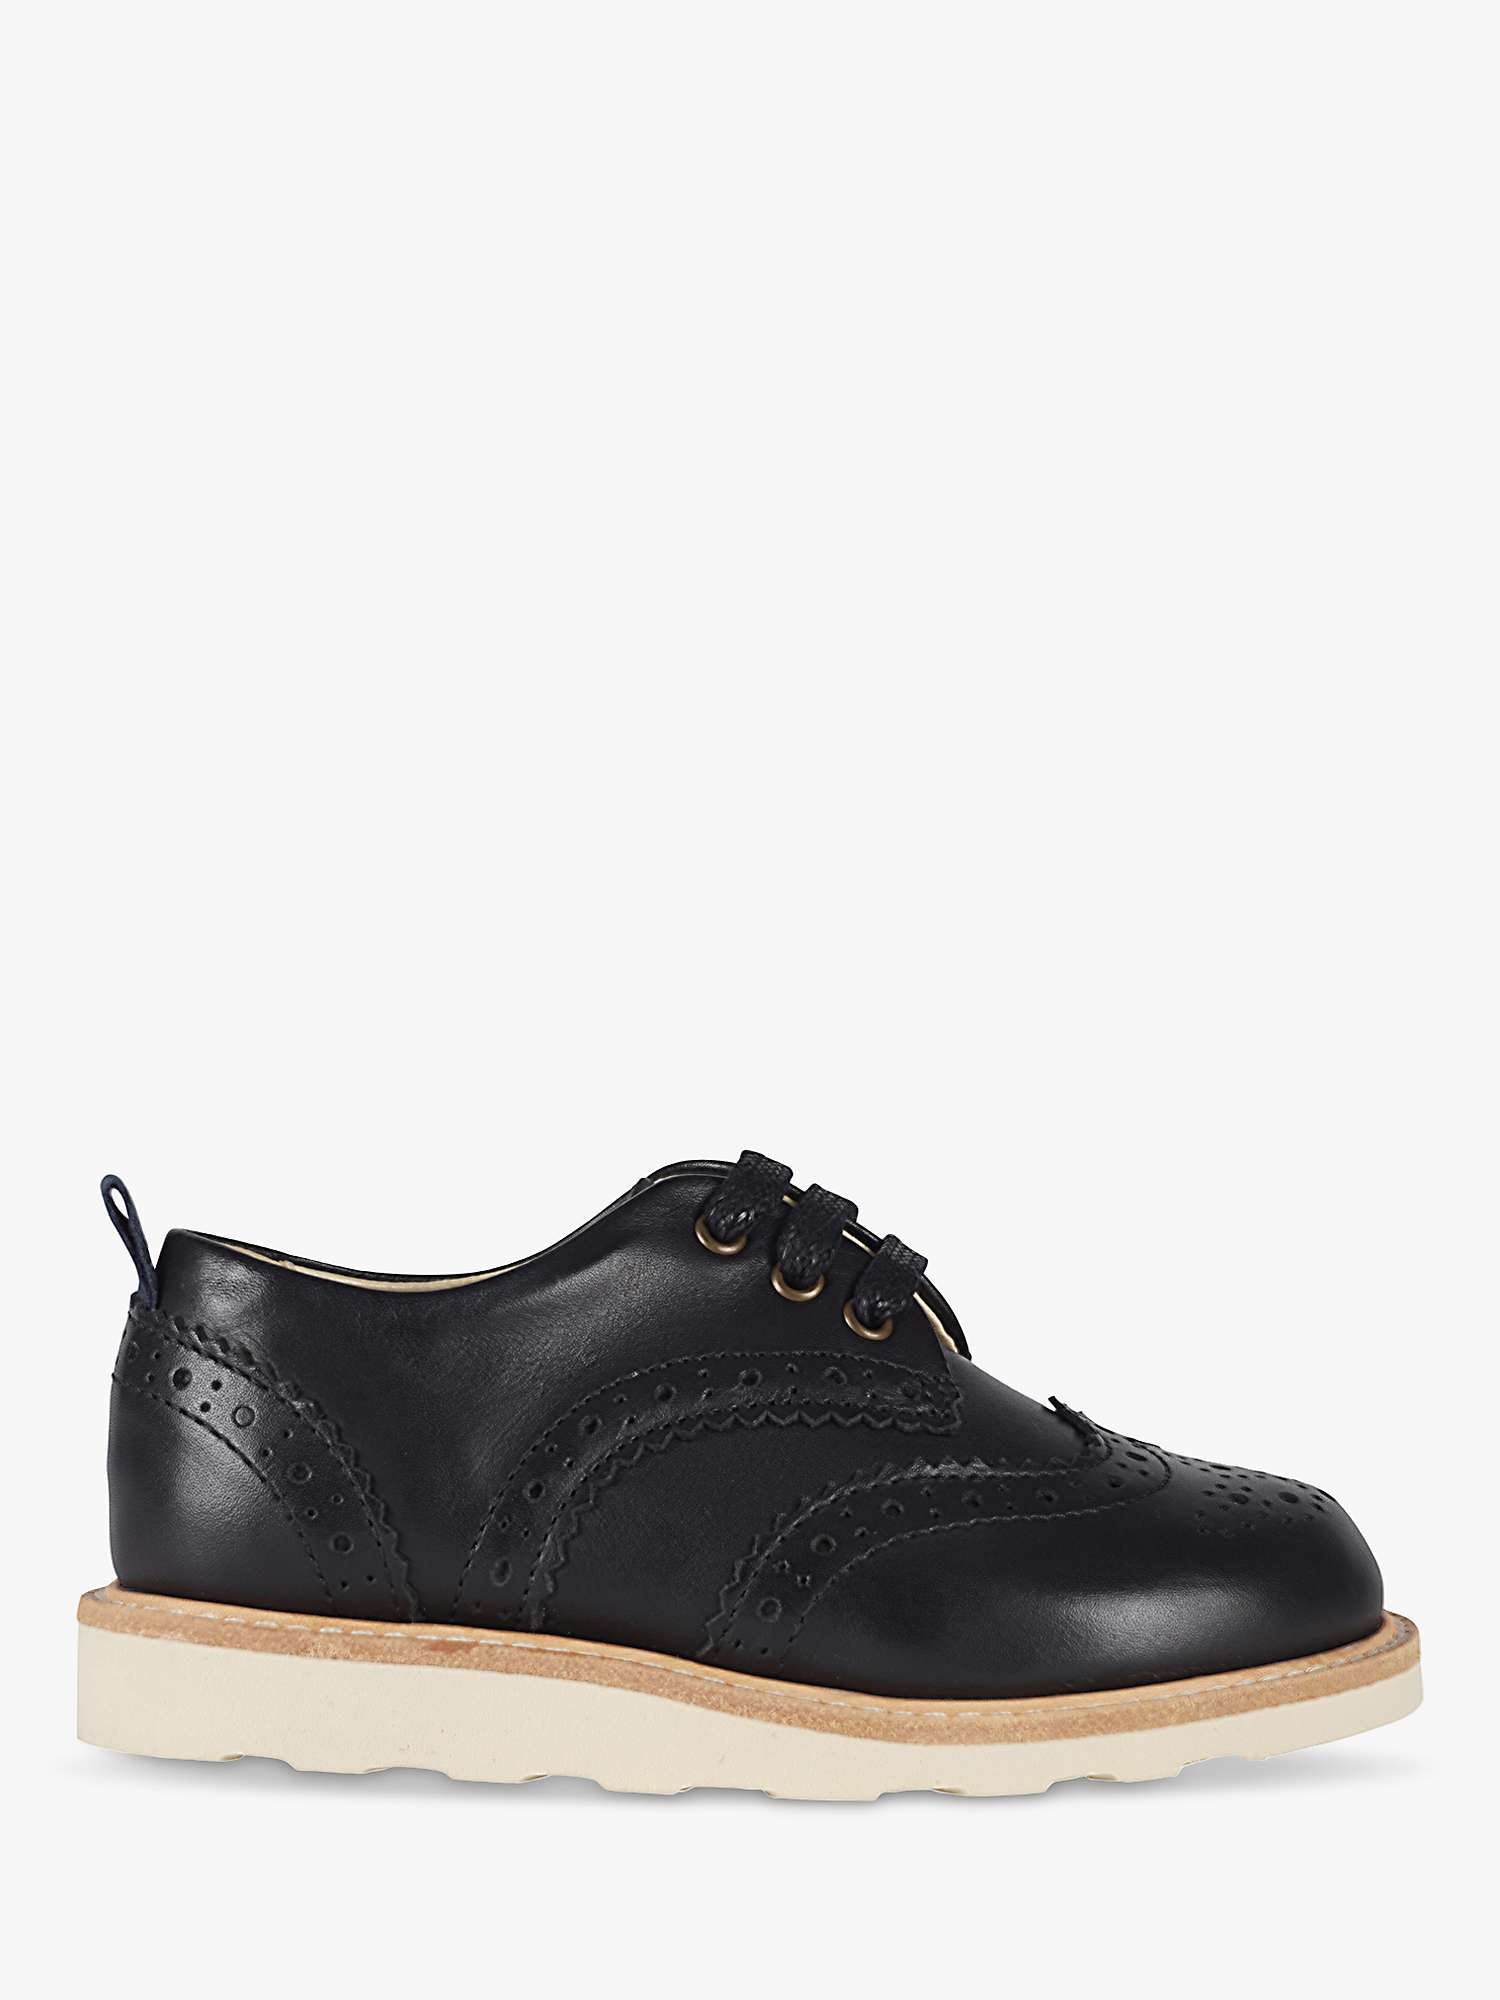 Buy Young Soles Kids' Brando Leather Brogues Online at johnlewis.com